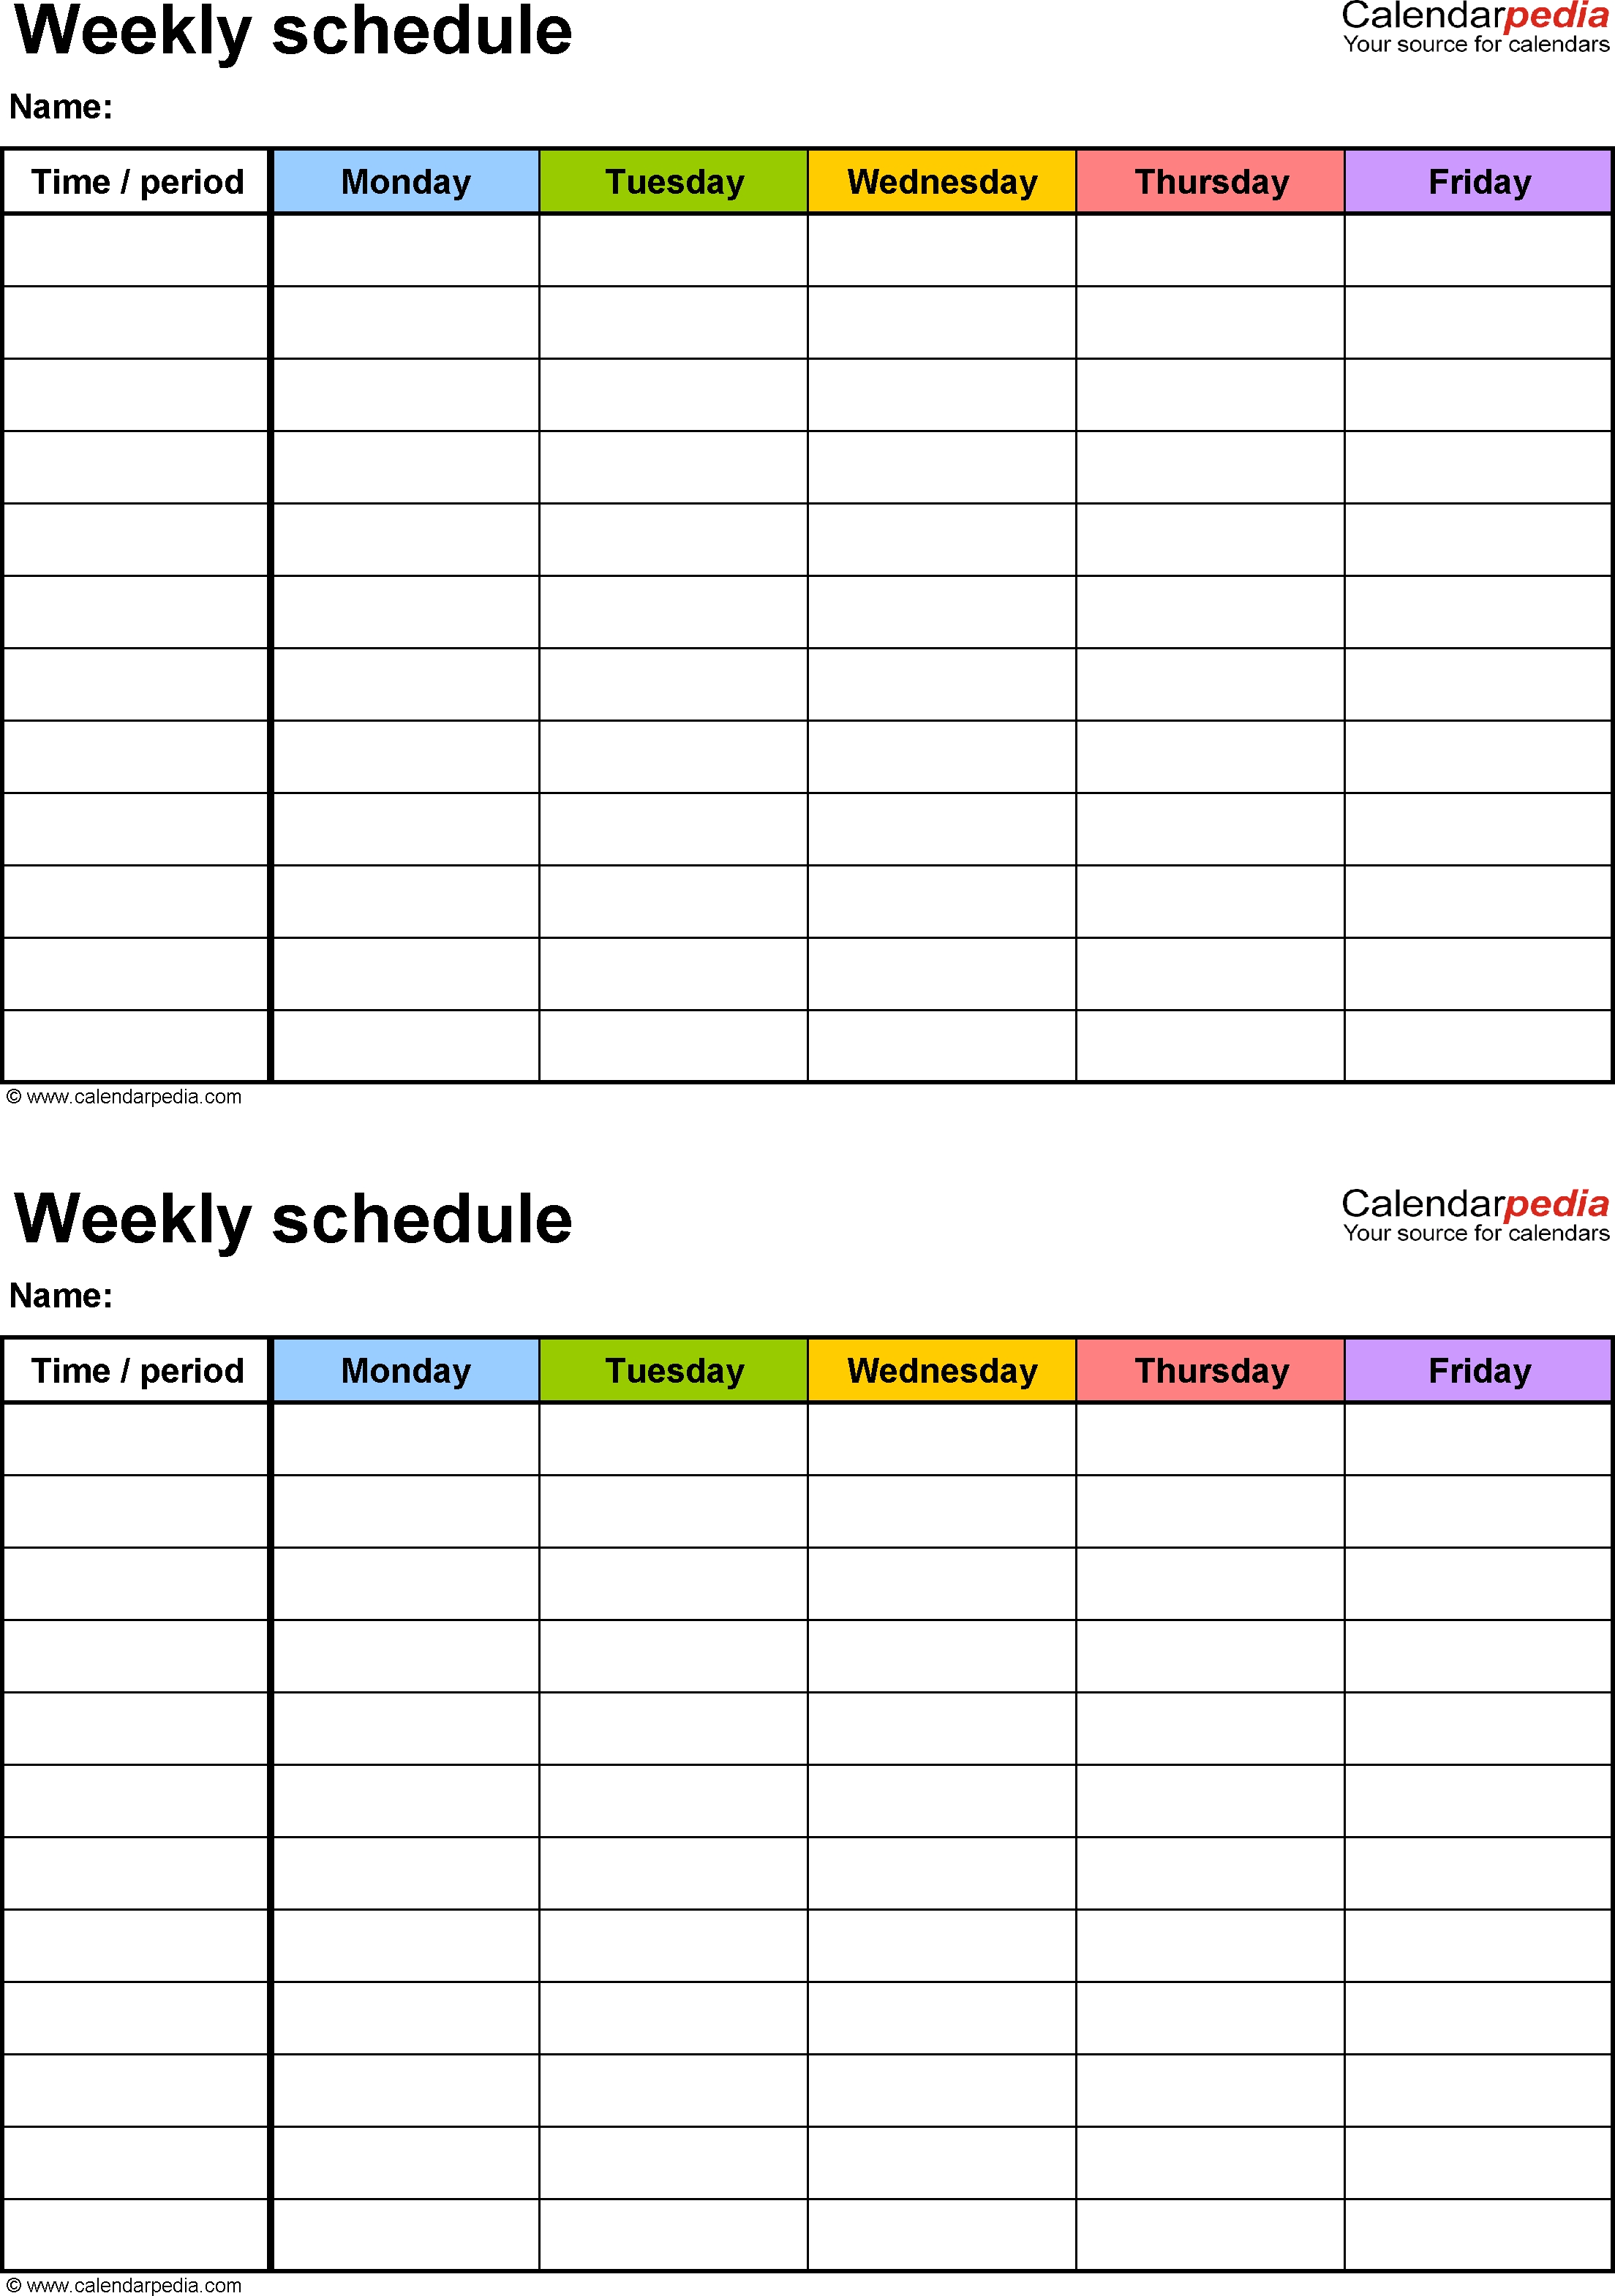 Free Weekly Schedule Templates For Word - 18 Templates pertaining to Free Template For Weekly Schedule